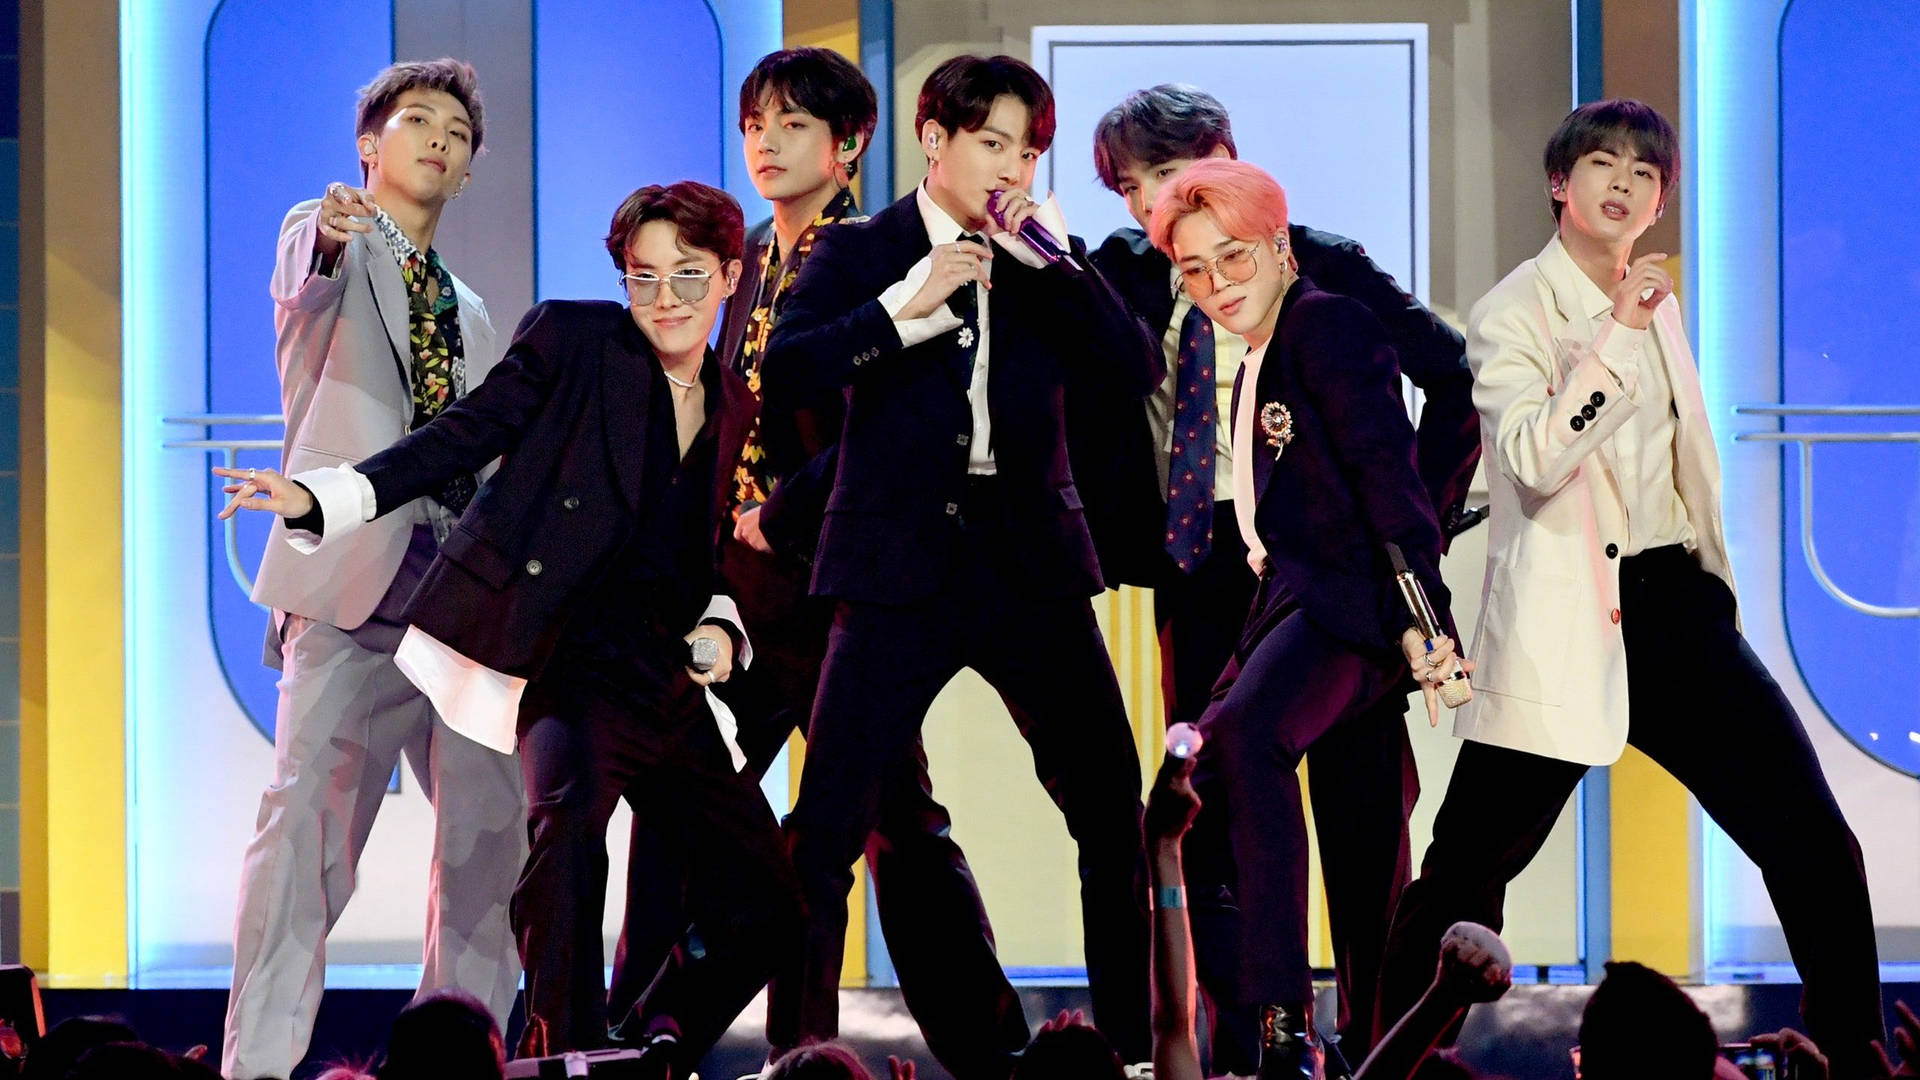 Bts 2021 Performing On Stage Background